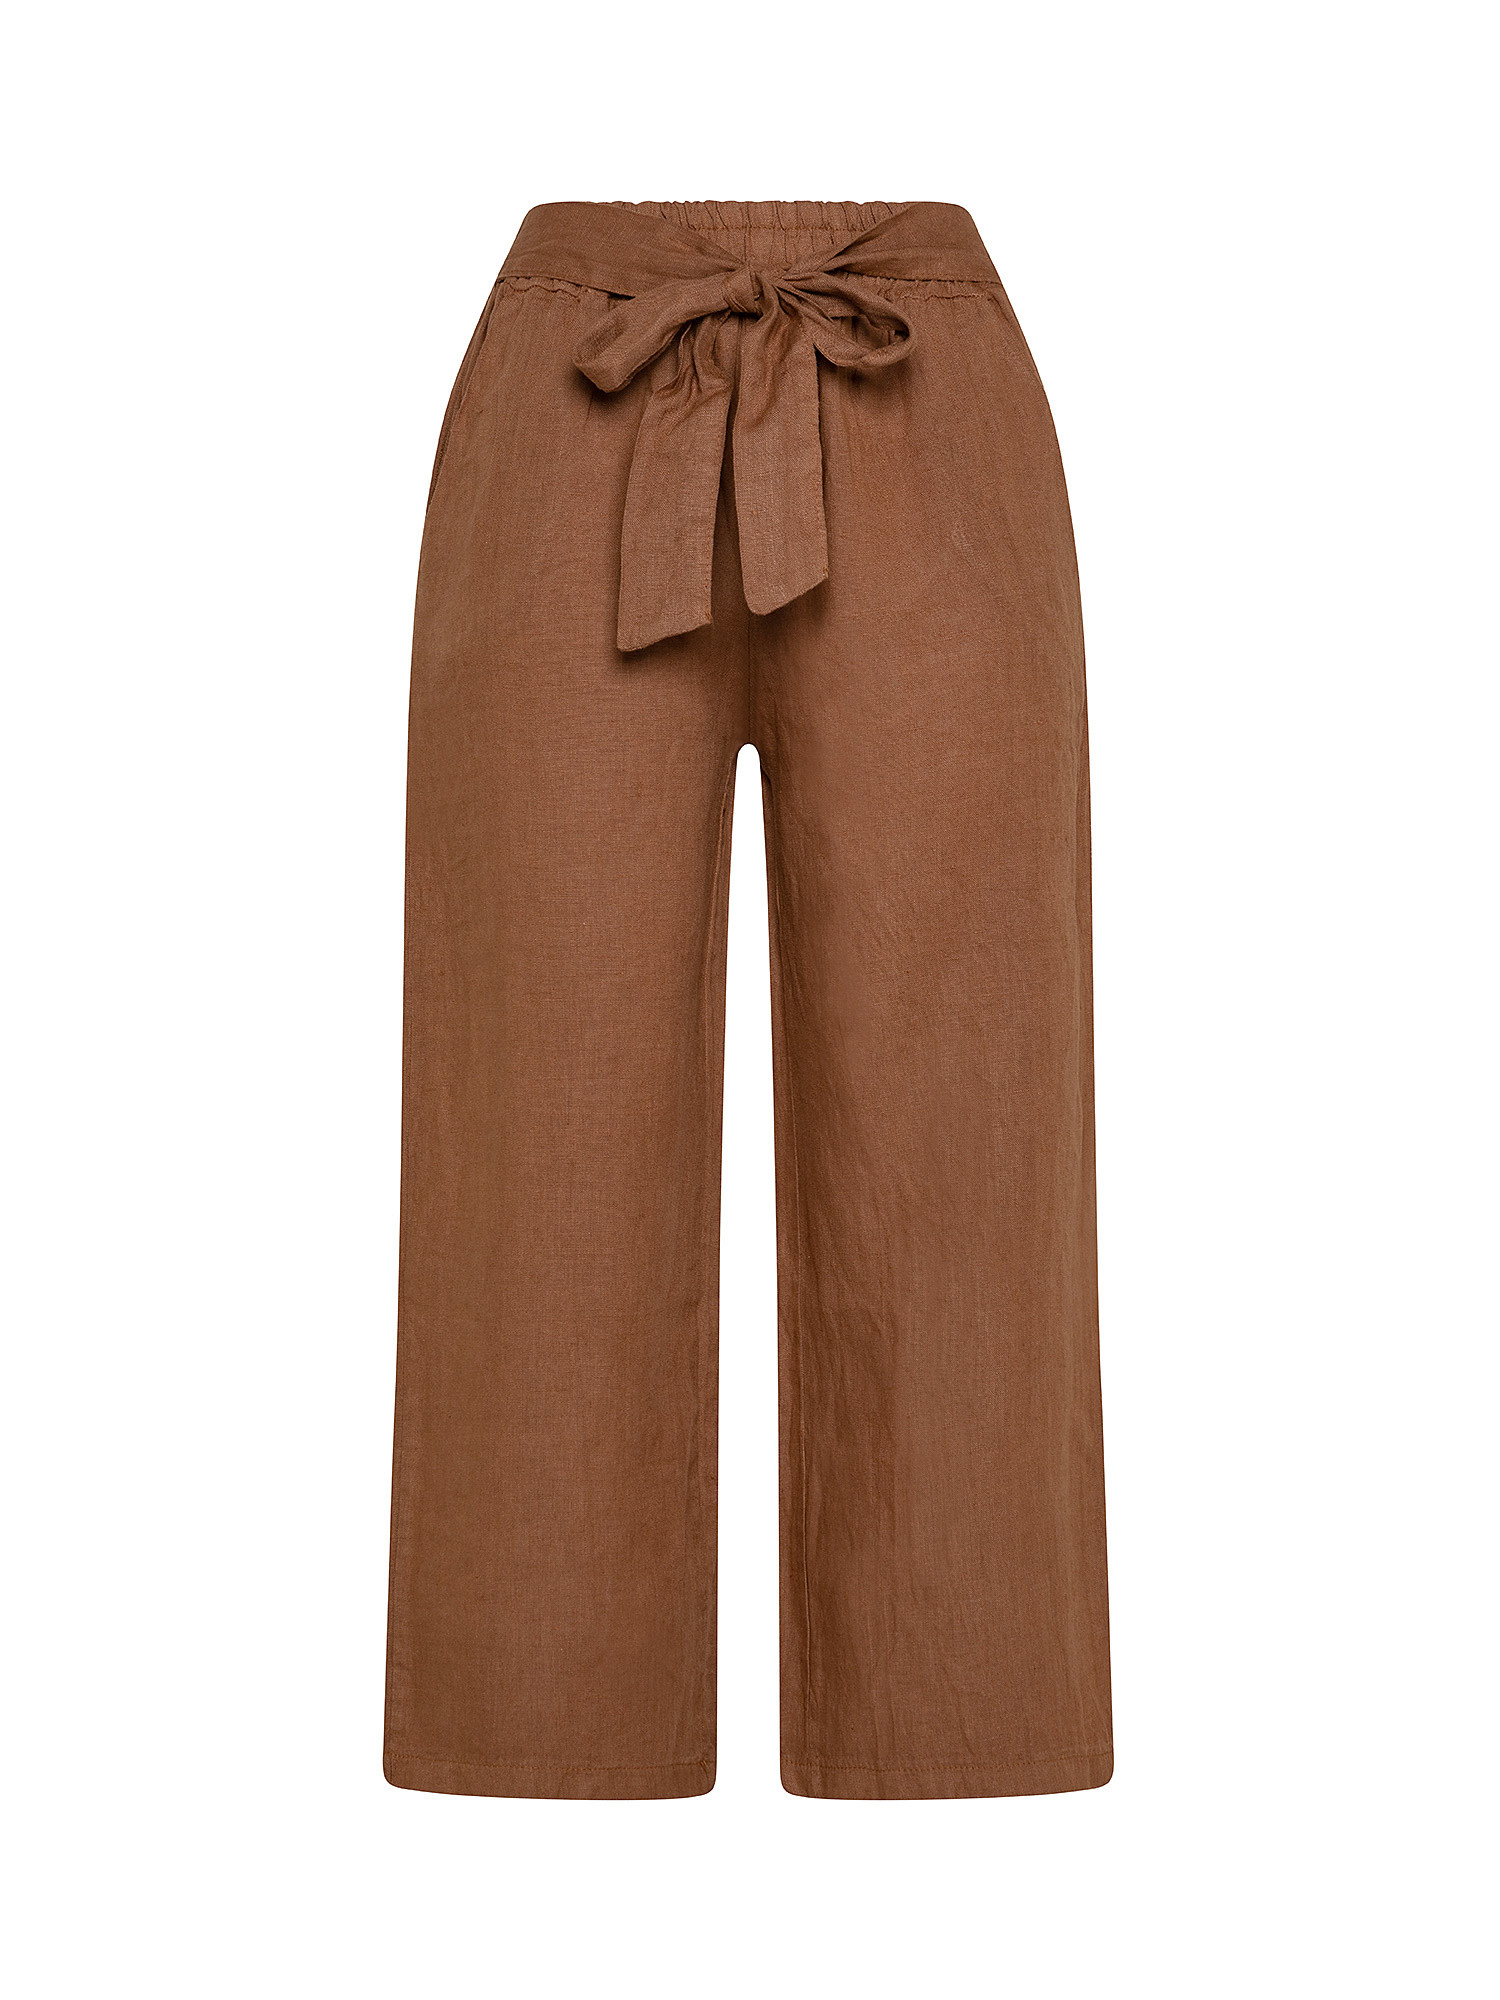 Pure linen trousers with sash, Brown, large image number 0